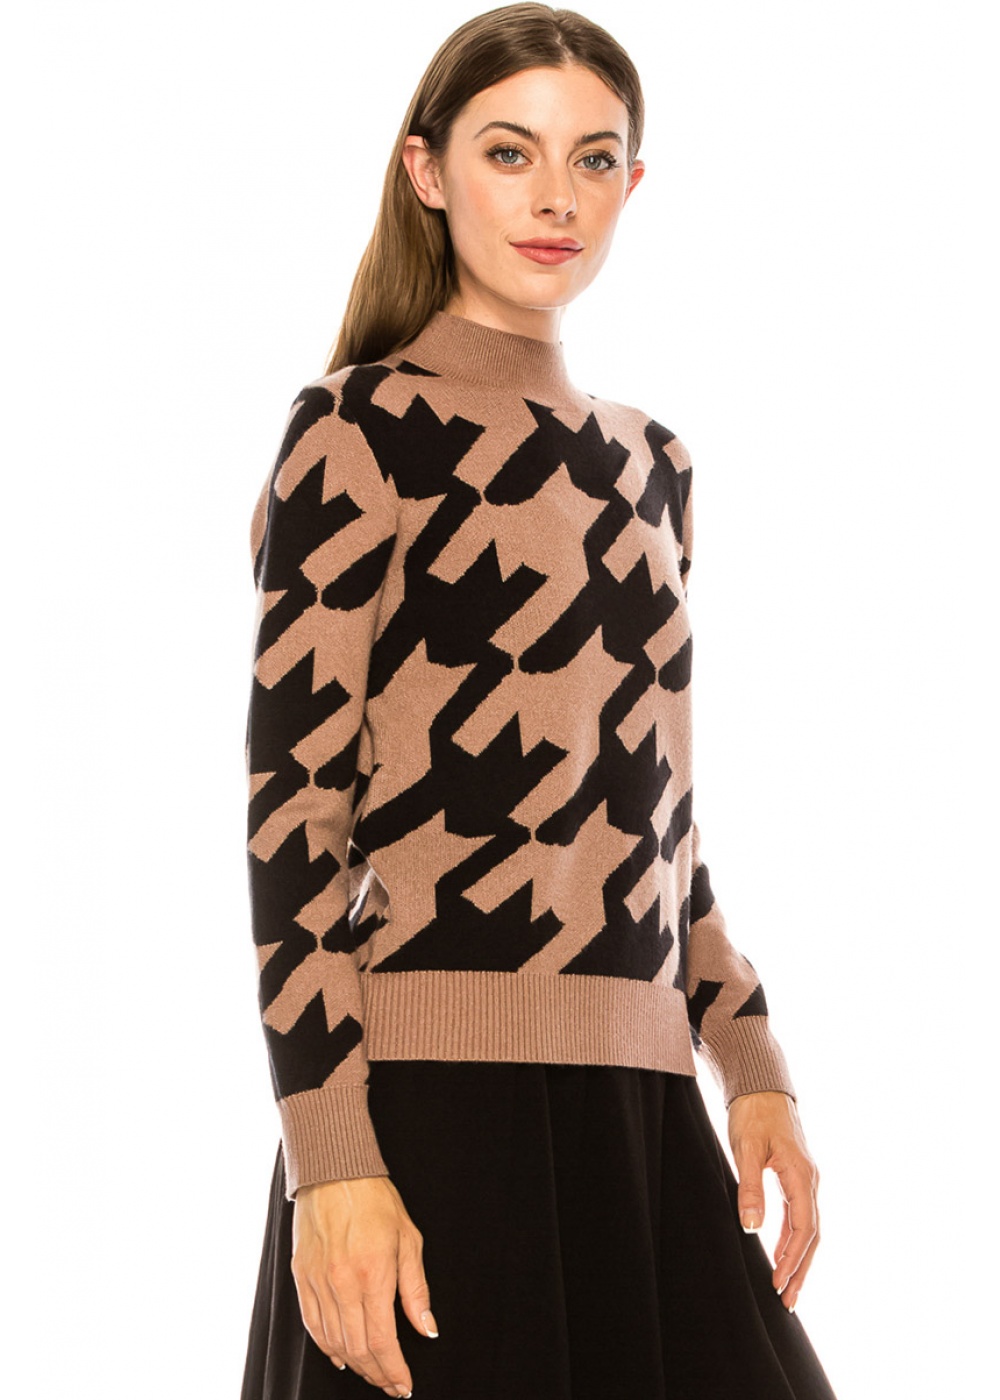 Large houndstooth pattern sweater in taupe